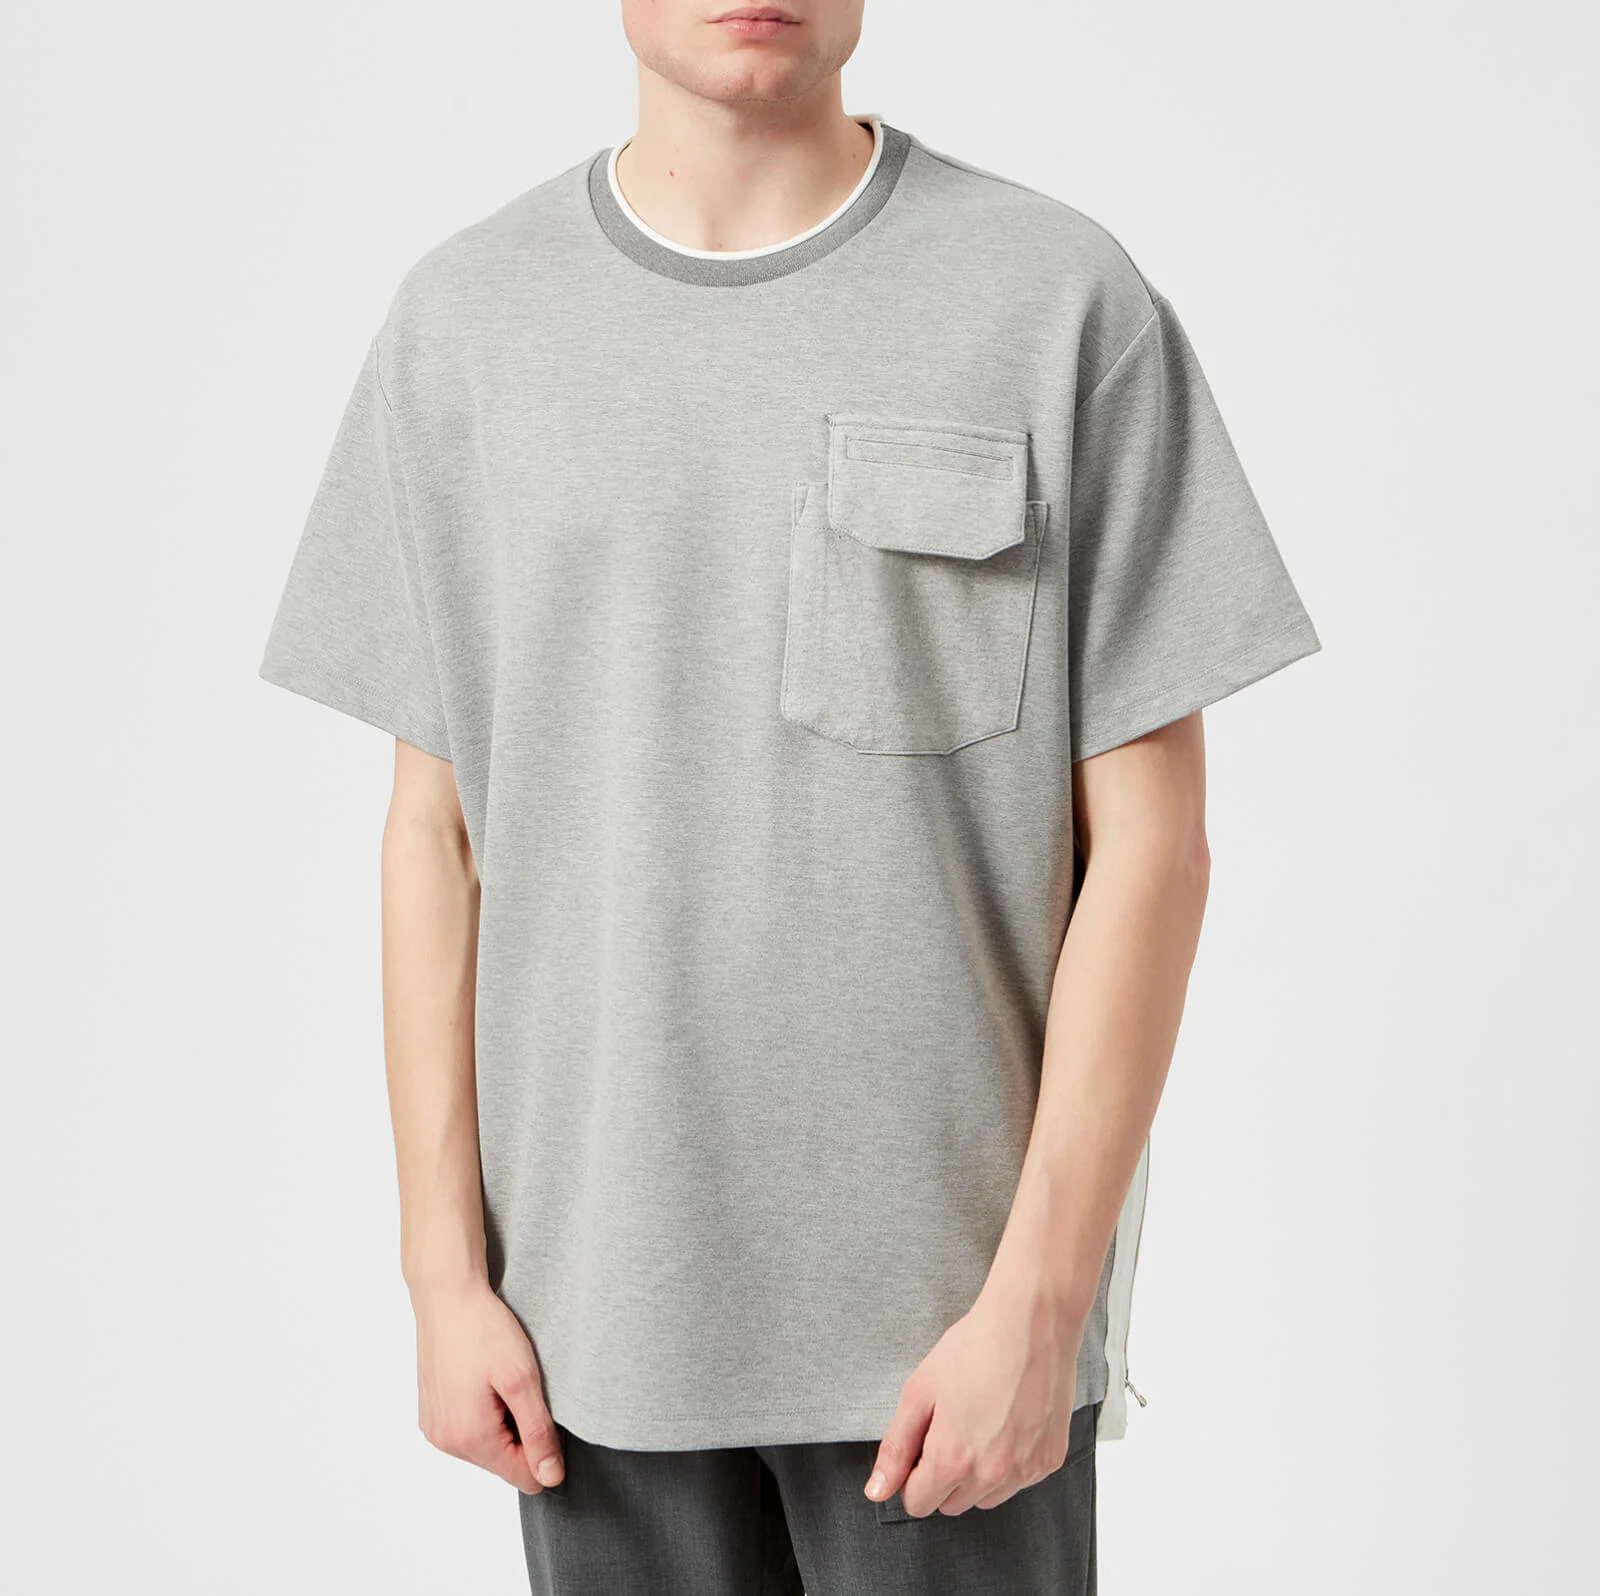 Wooyoungmi Men's Large Pocket and Zip Detail T-Shirt - Grey Image 1